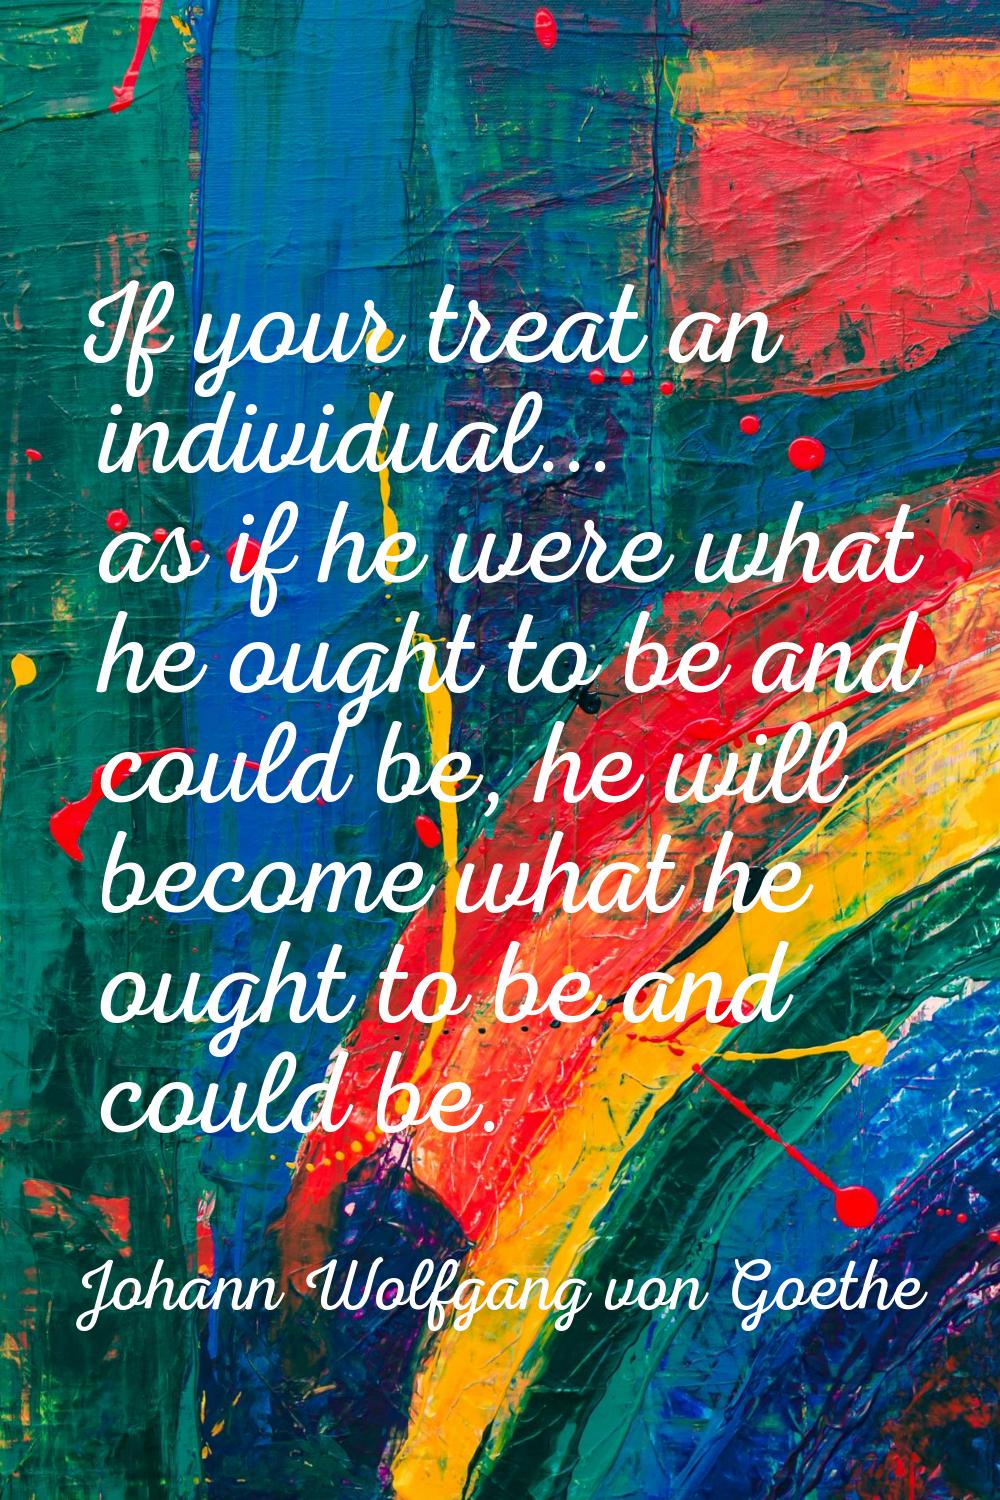 If your treat an individual... as if he were what he ought to be and could be, he will become what 